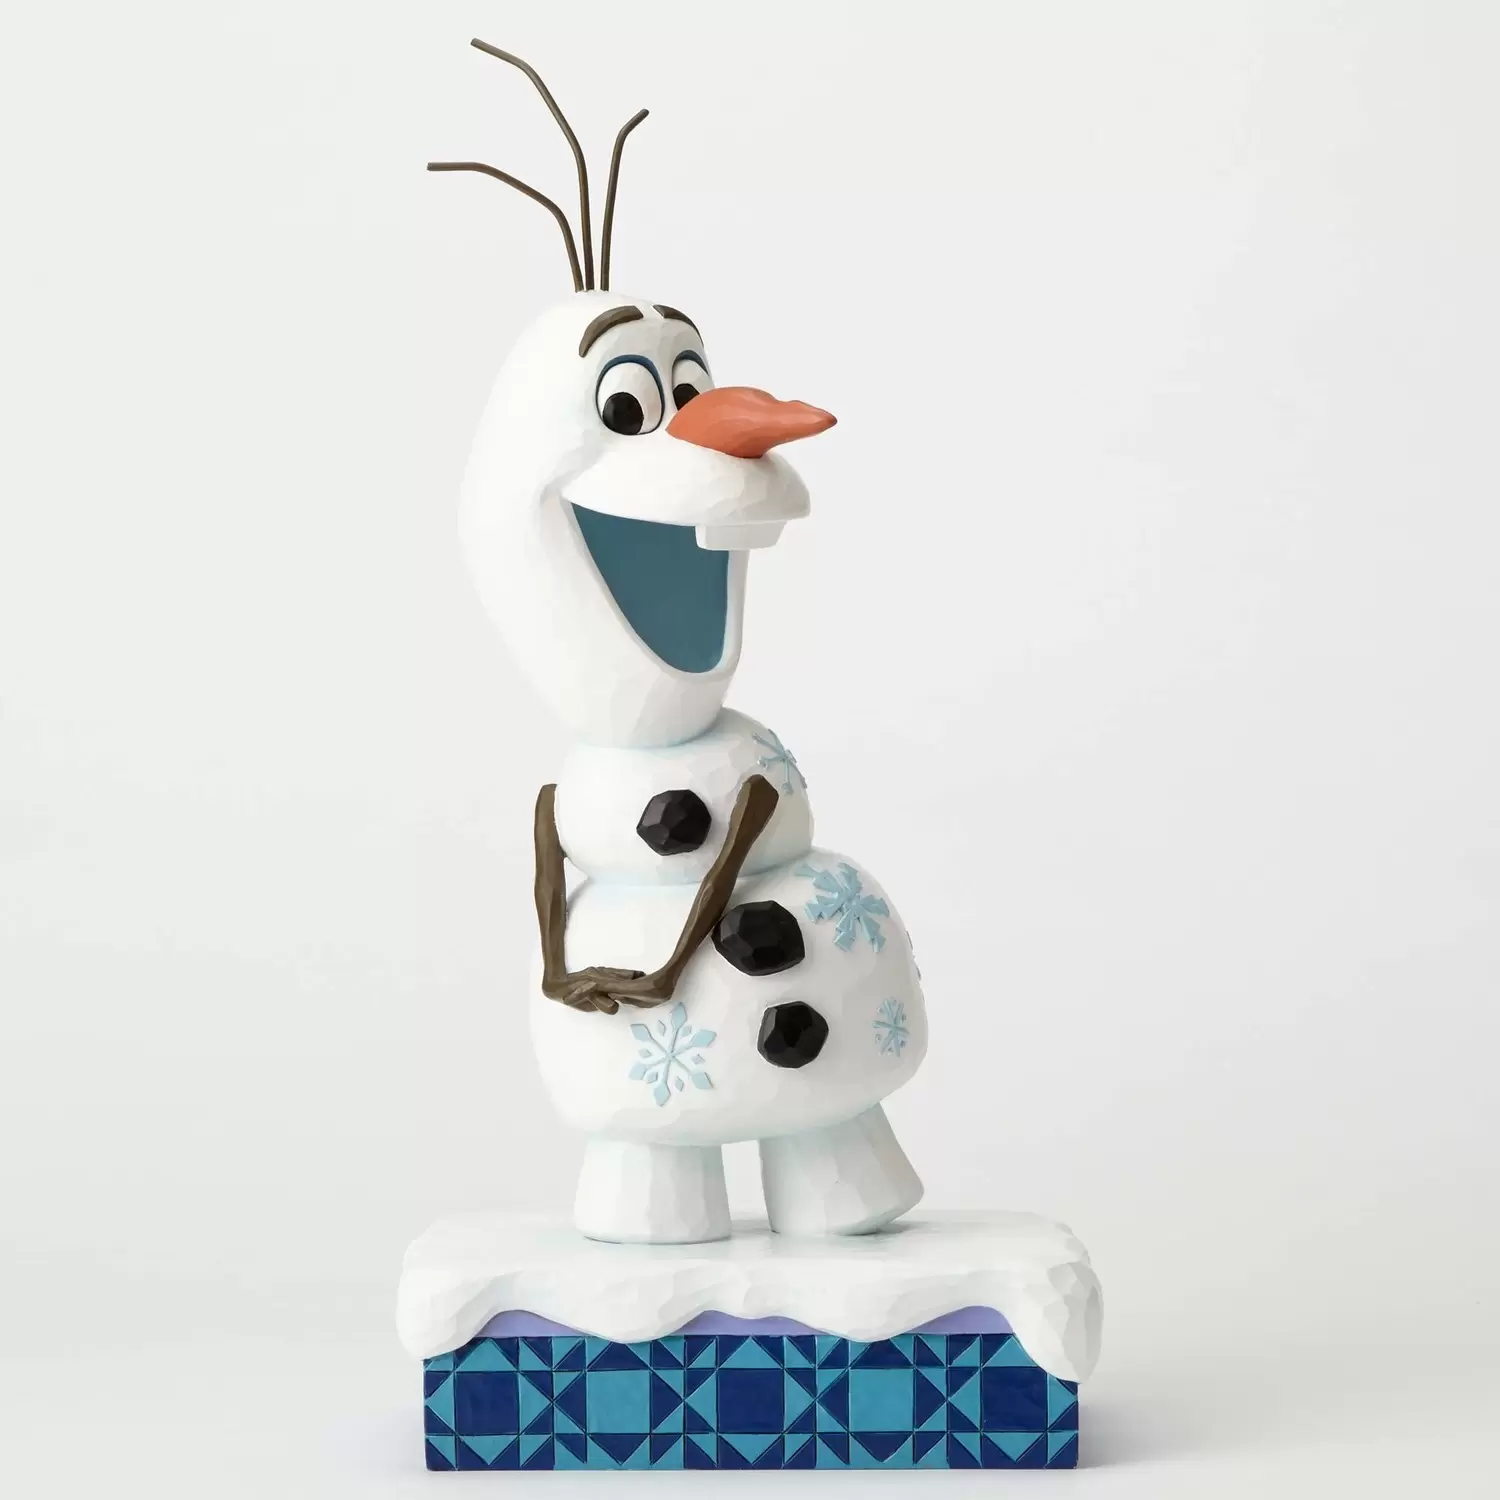 Disney Traditions by Jim Shore - Snow Place Like Home - Big Olaf